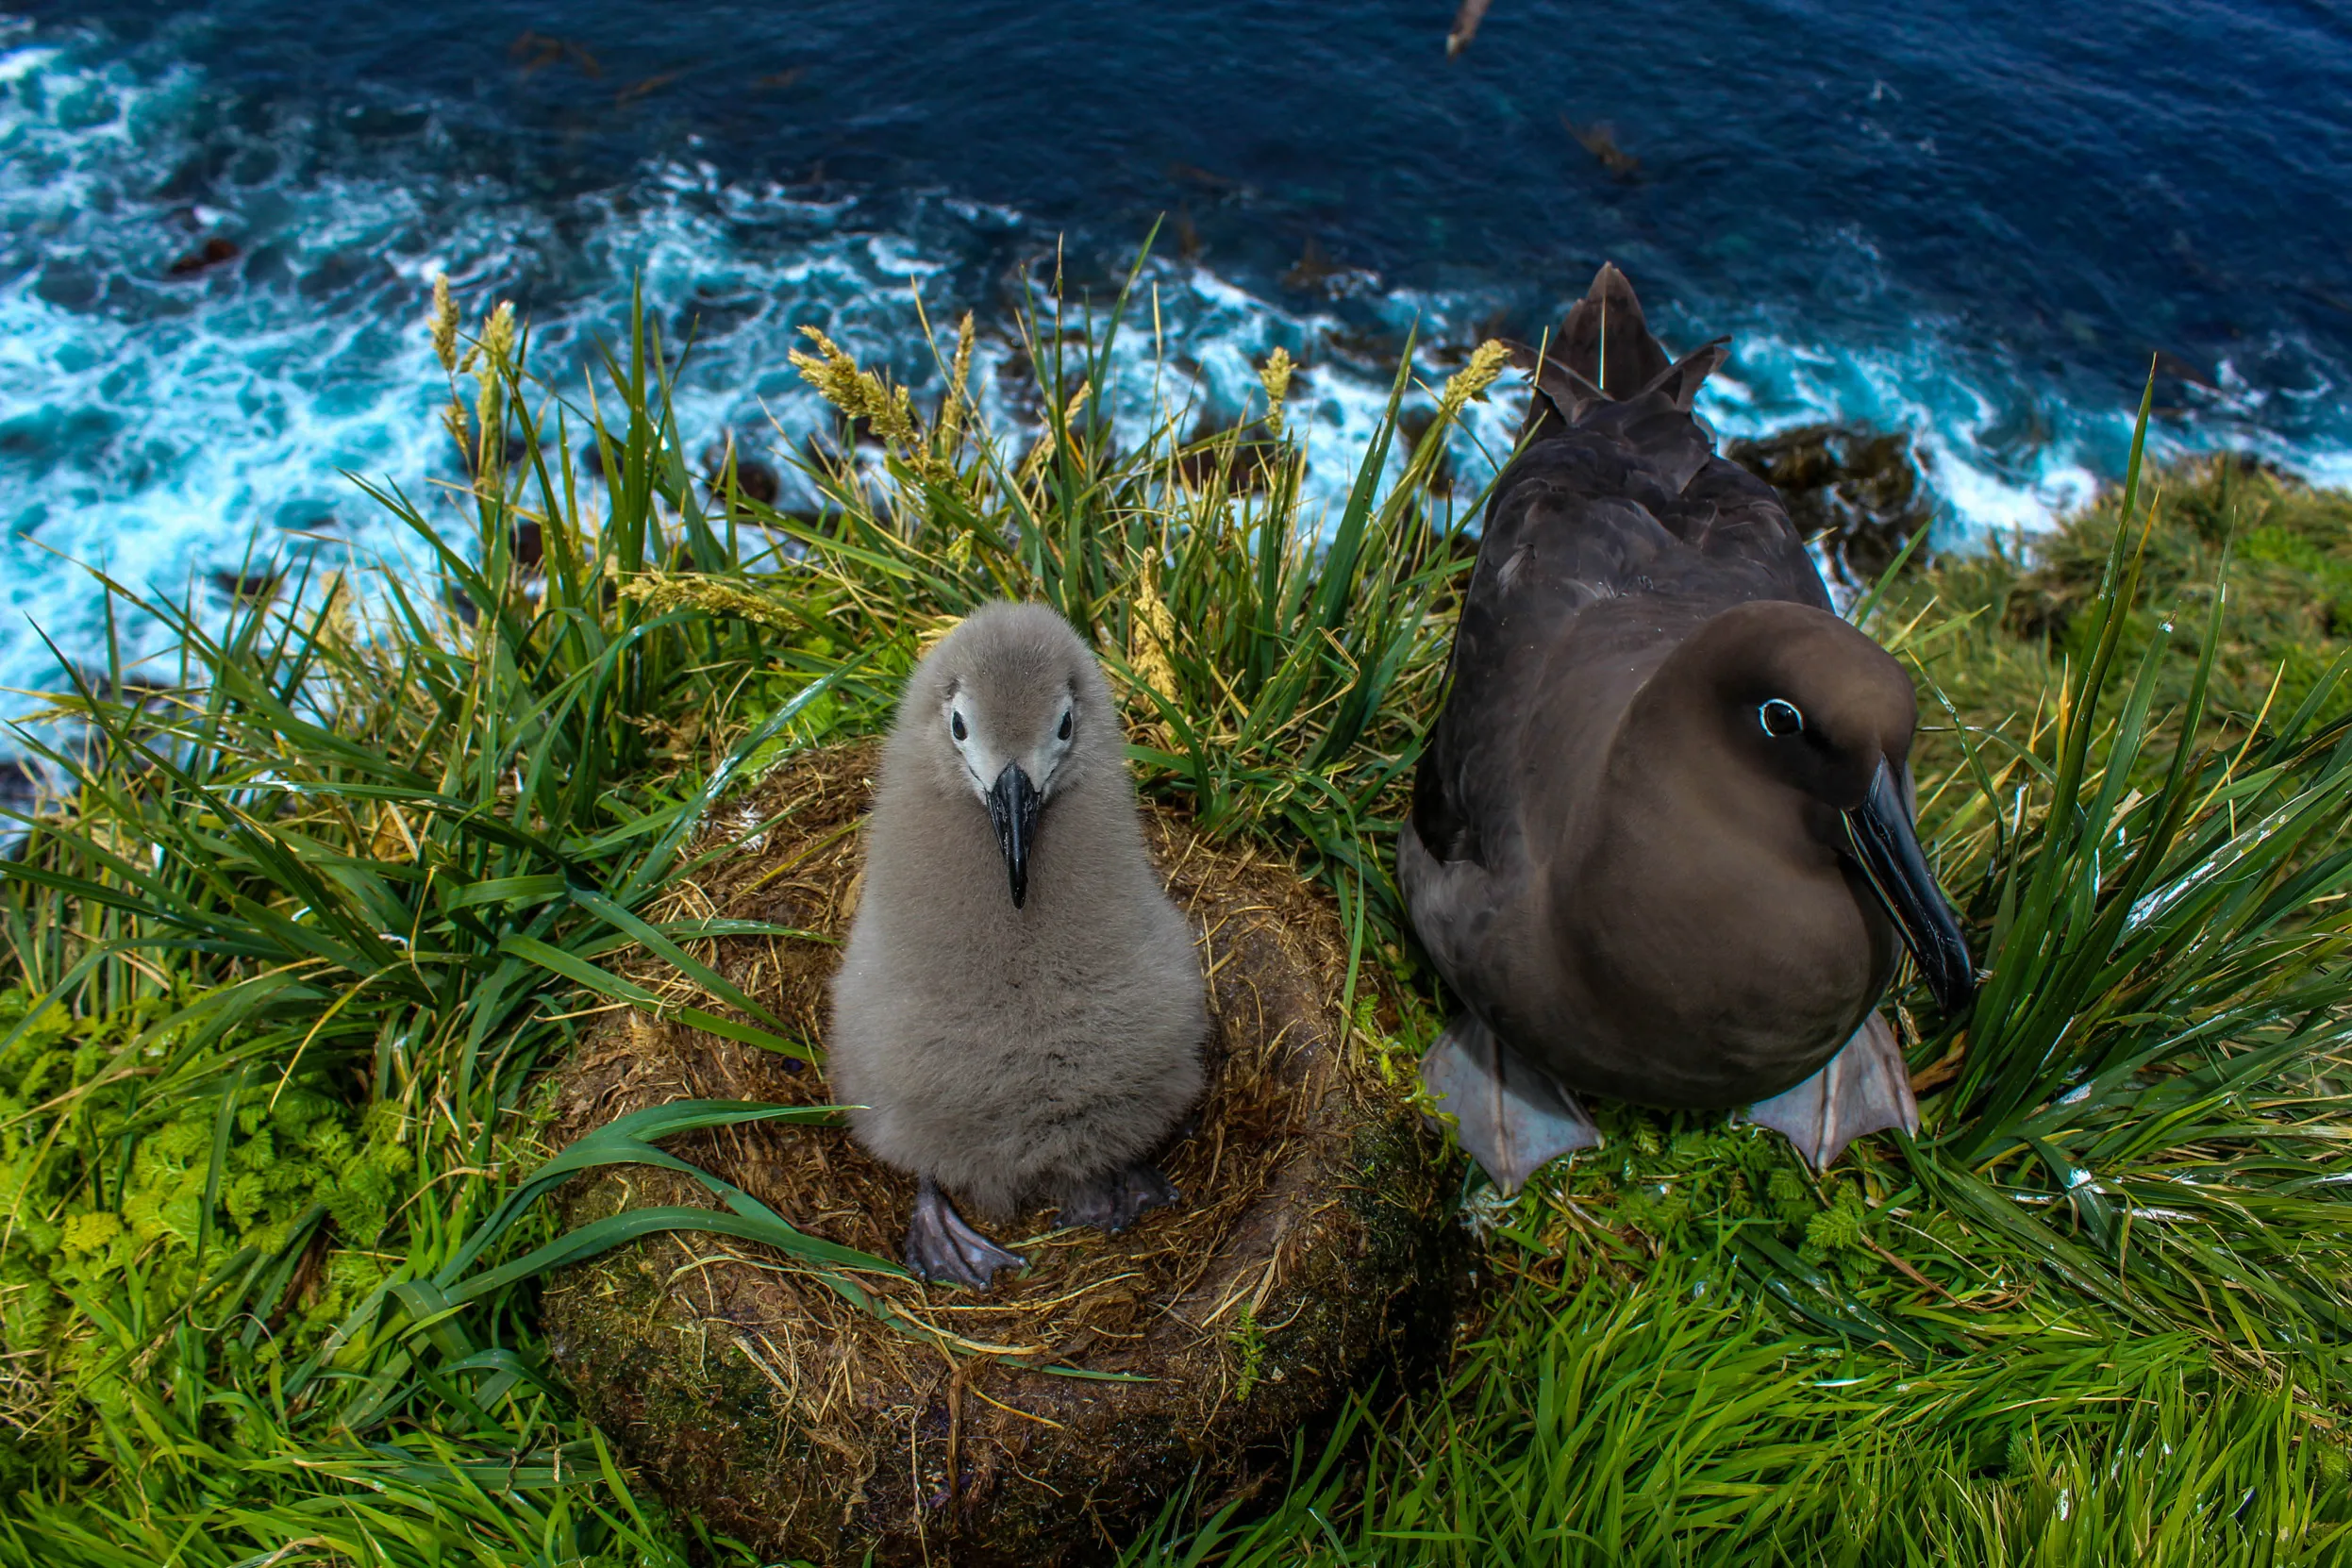 An Albatross chick perched in it's nest whilst an adult stands next to them on a cliff edge by the sea.